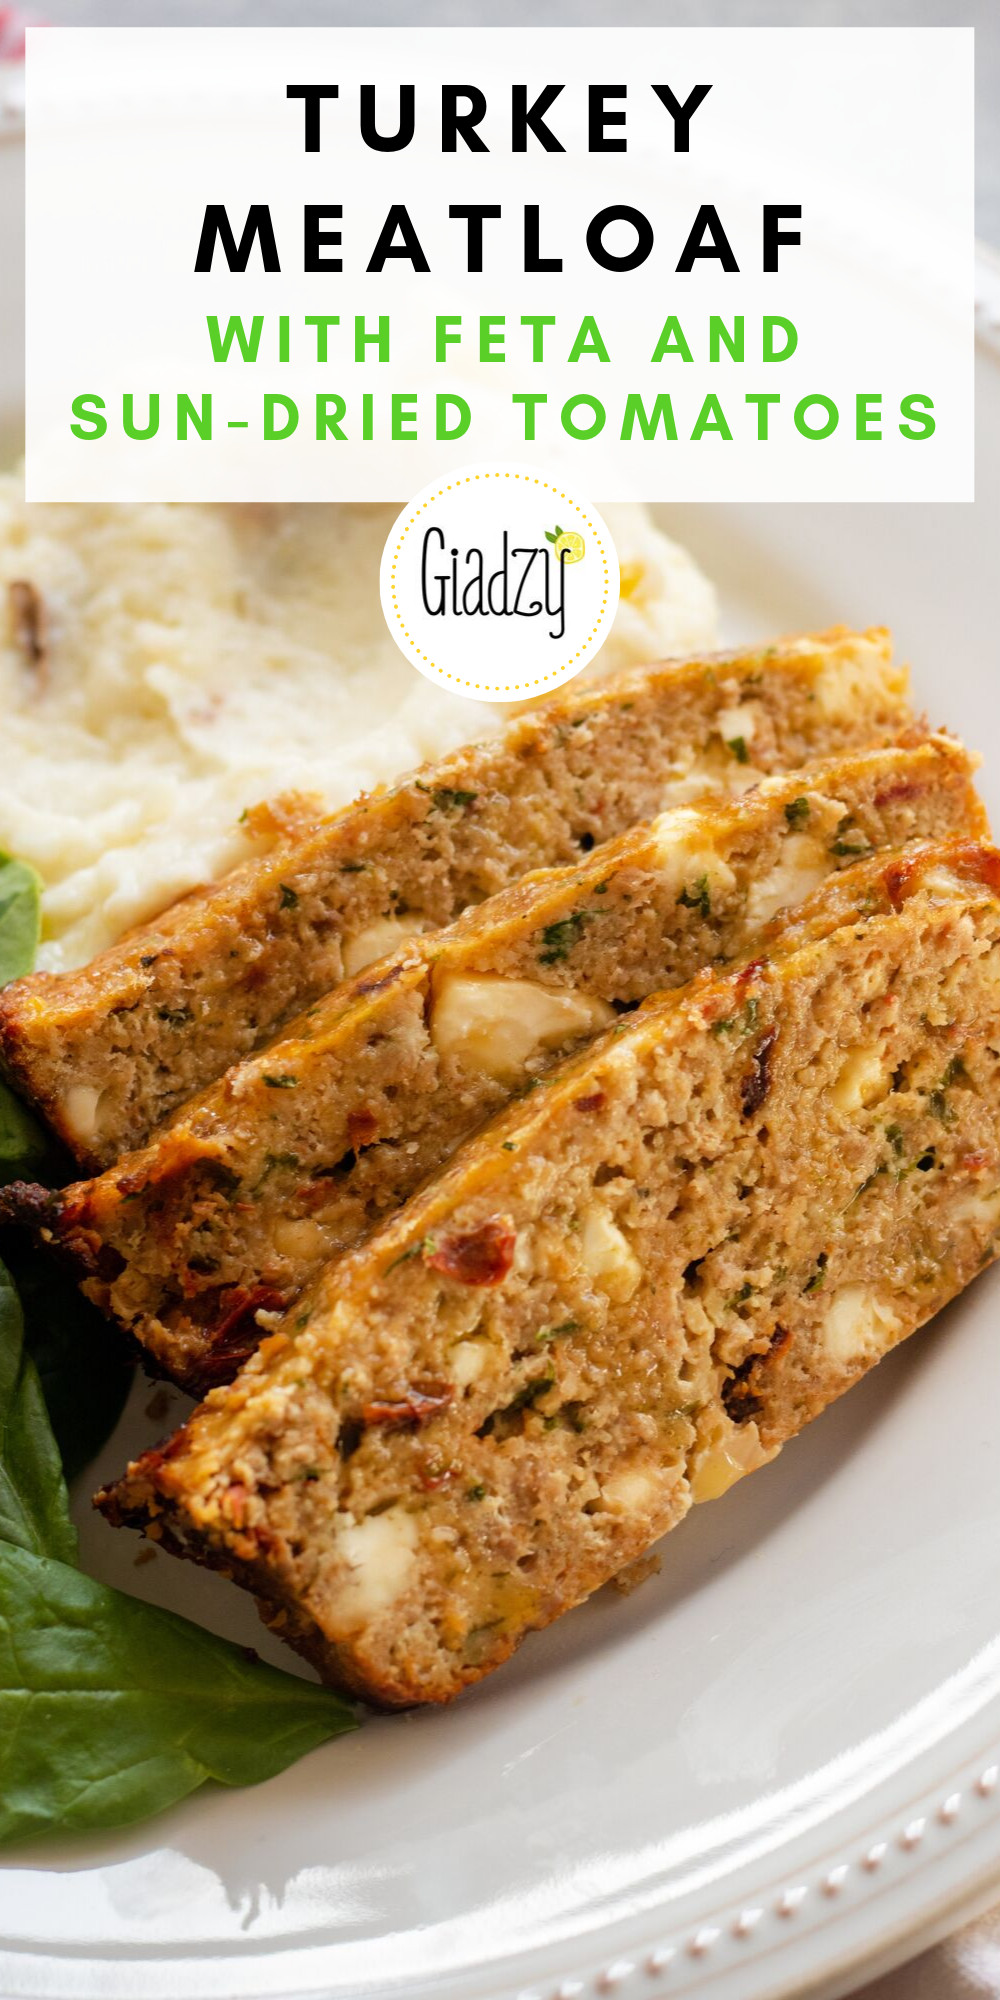 Giada Turkey Meatloaf
 Turkey Meatloaf with Feta and Sun Dried Tomatoes